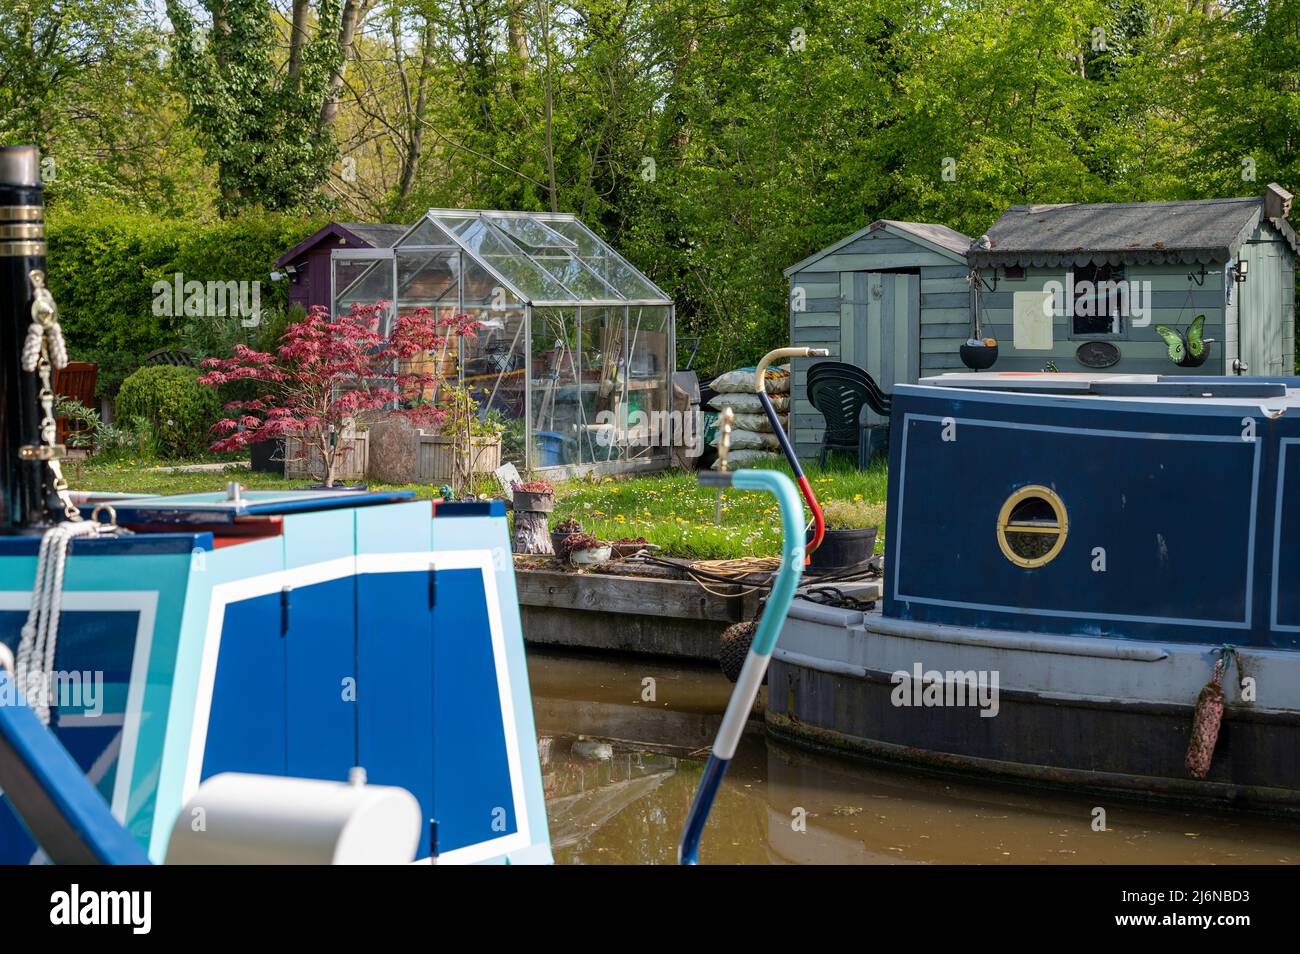 Narrowboats moored beside a well kept garden belonging to a residential mooring on the Shropshire Union Canal at Norbury, Staffordshire Stock Photo